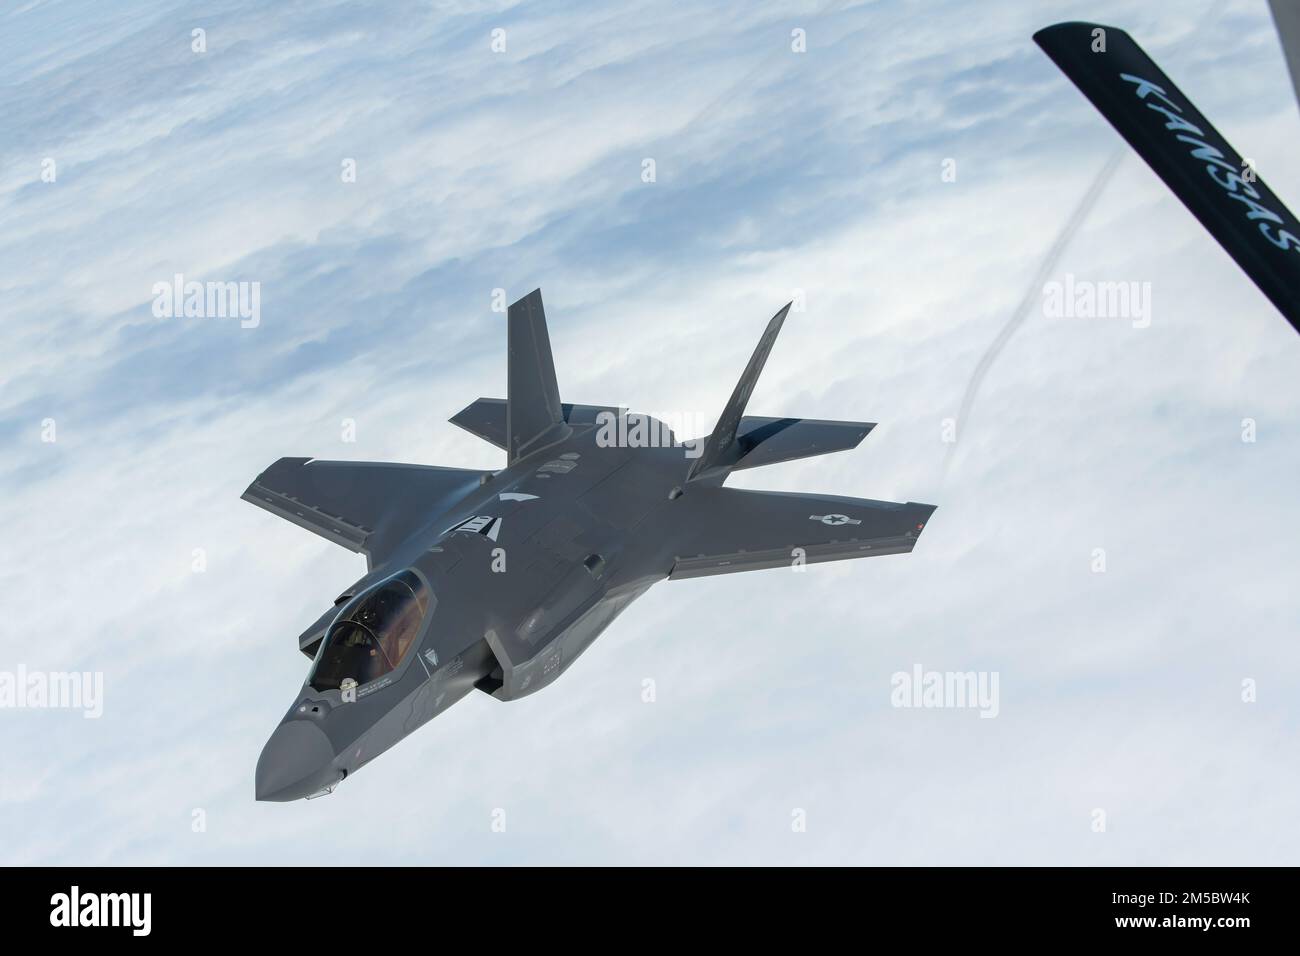 An F-35A Lightning II from the 354th Fighter Wing, Eielson Air Force Base, Alaska, departs from a KC-135 Stratotanker assigned to the 117th Air Refueling Squadron, Forbes Field Air National Guard Base, Topeka, Kansas, after receiving fuel over the Indo-Pacific theater, Feb. 24, 2022.  The F-35As are currently deployed to Kadena Air Base, Japan, conducting integrated operations with joint partners and allies to maintain a free and open Indo-Pacific region. Stock Photo